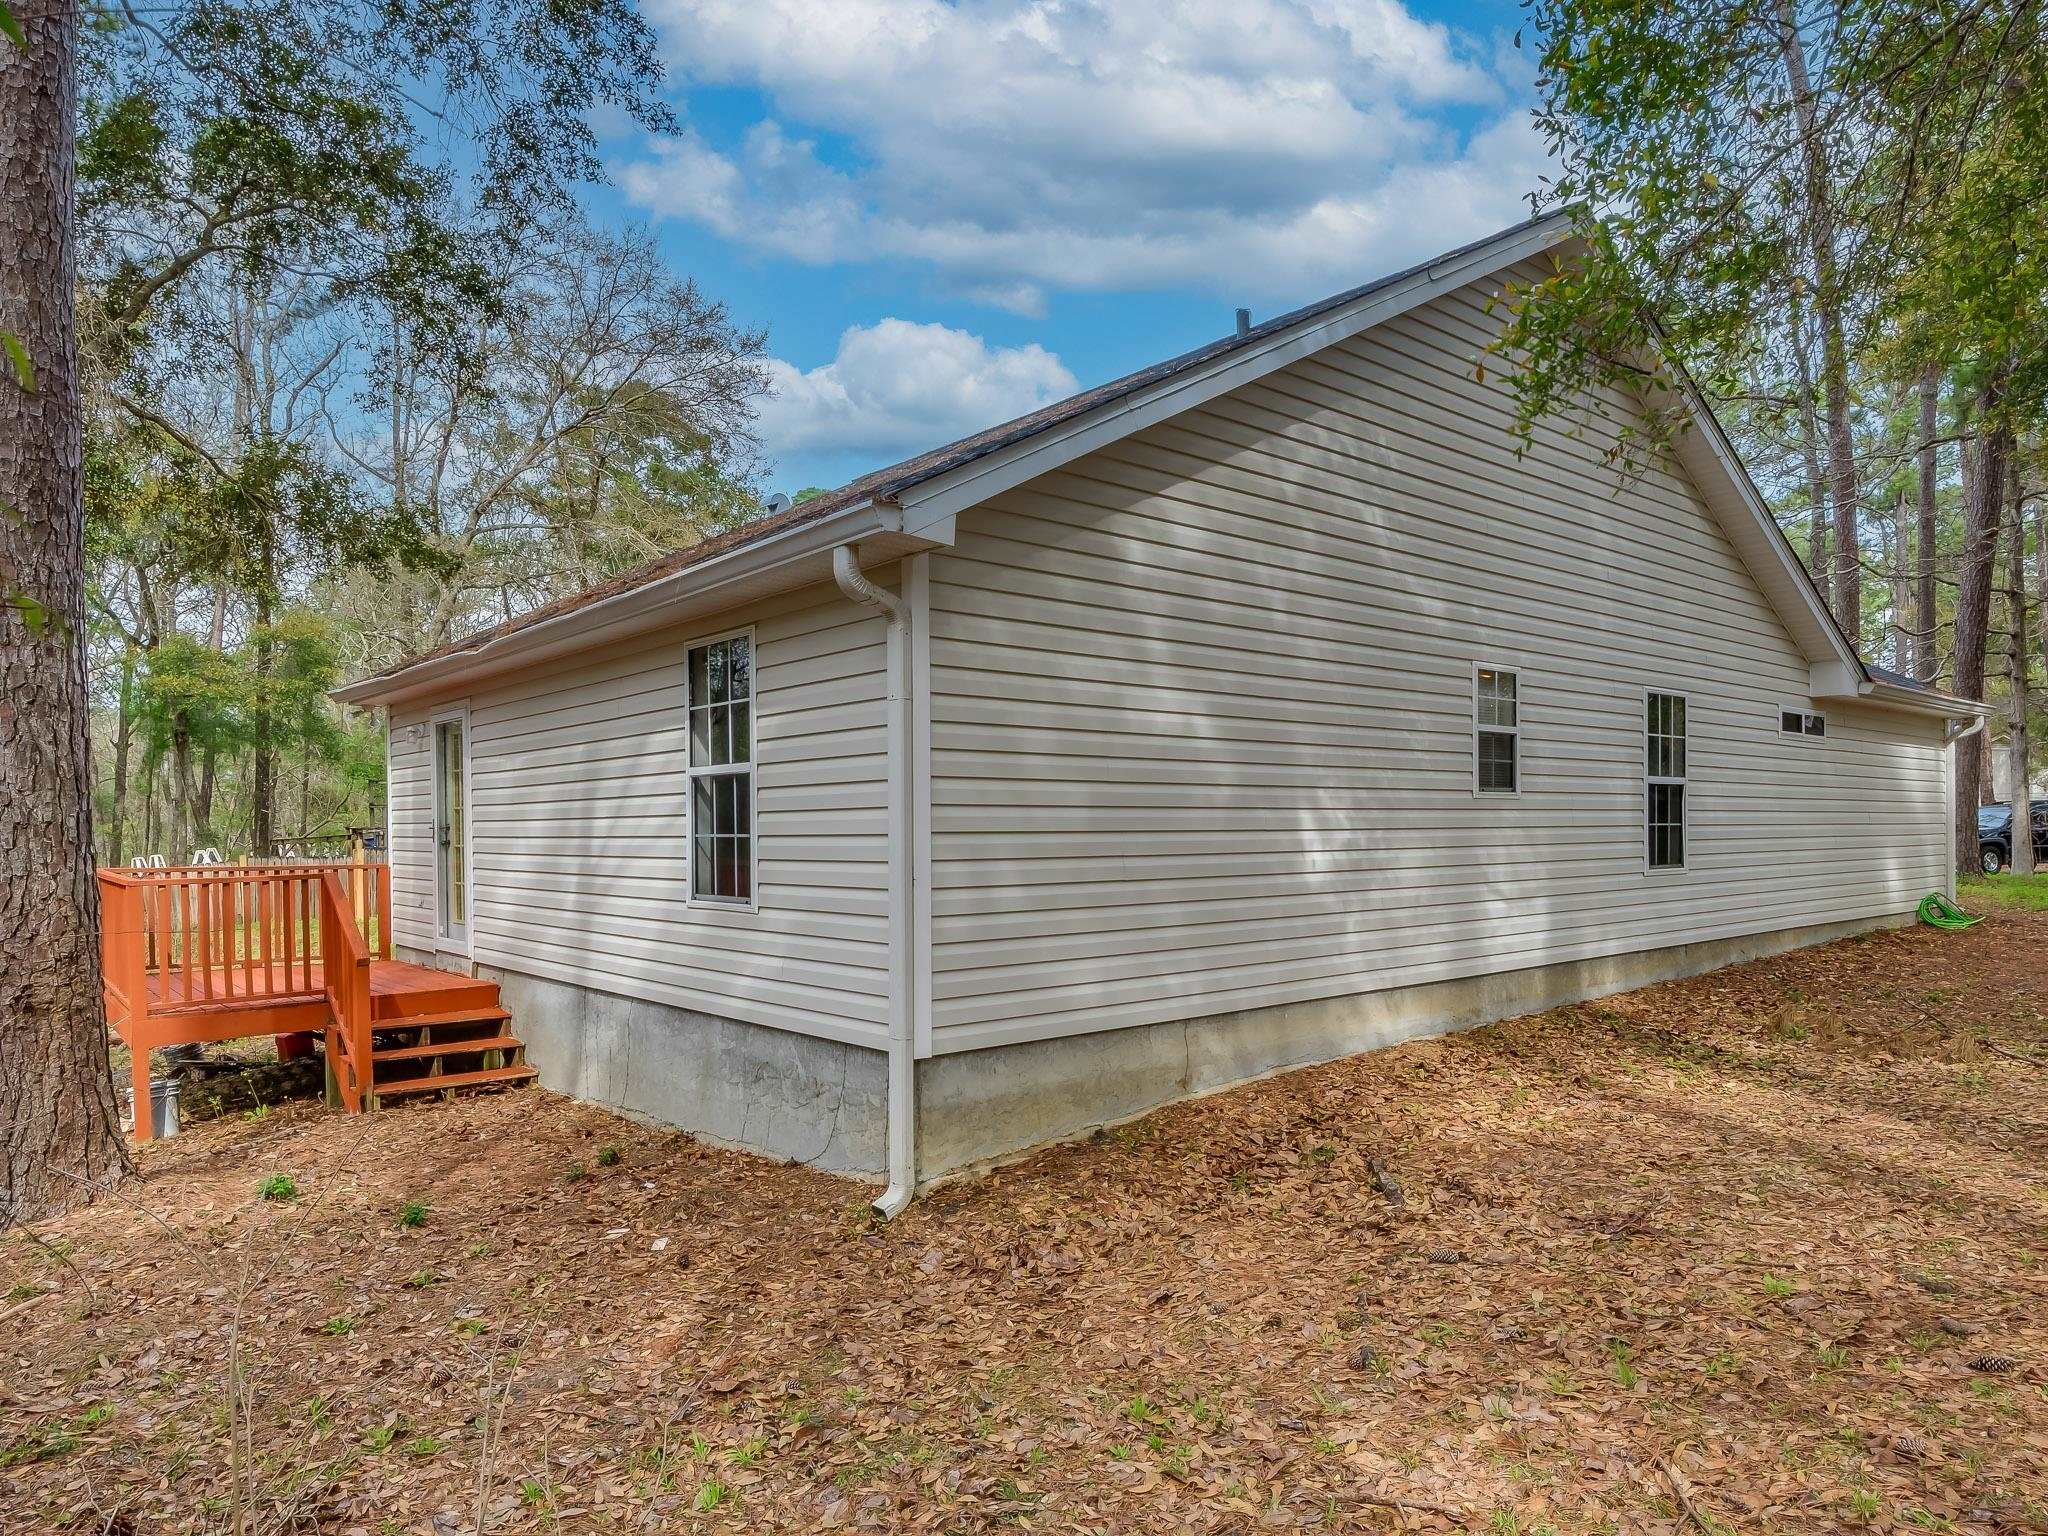 8616 Oak Forest Trail,TALLAHASSEE,Florida 32312,3 Bedrooms Bedrooms,2 BathroomsBathrooms,Detached single family,8616 Oak Forest Trail,369202